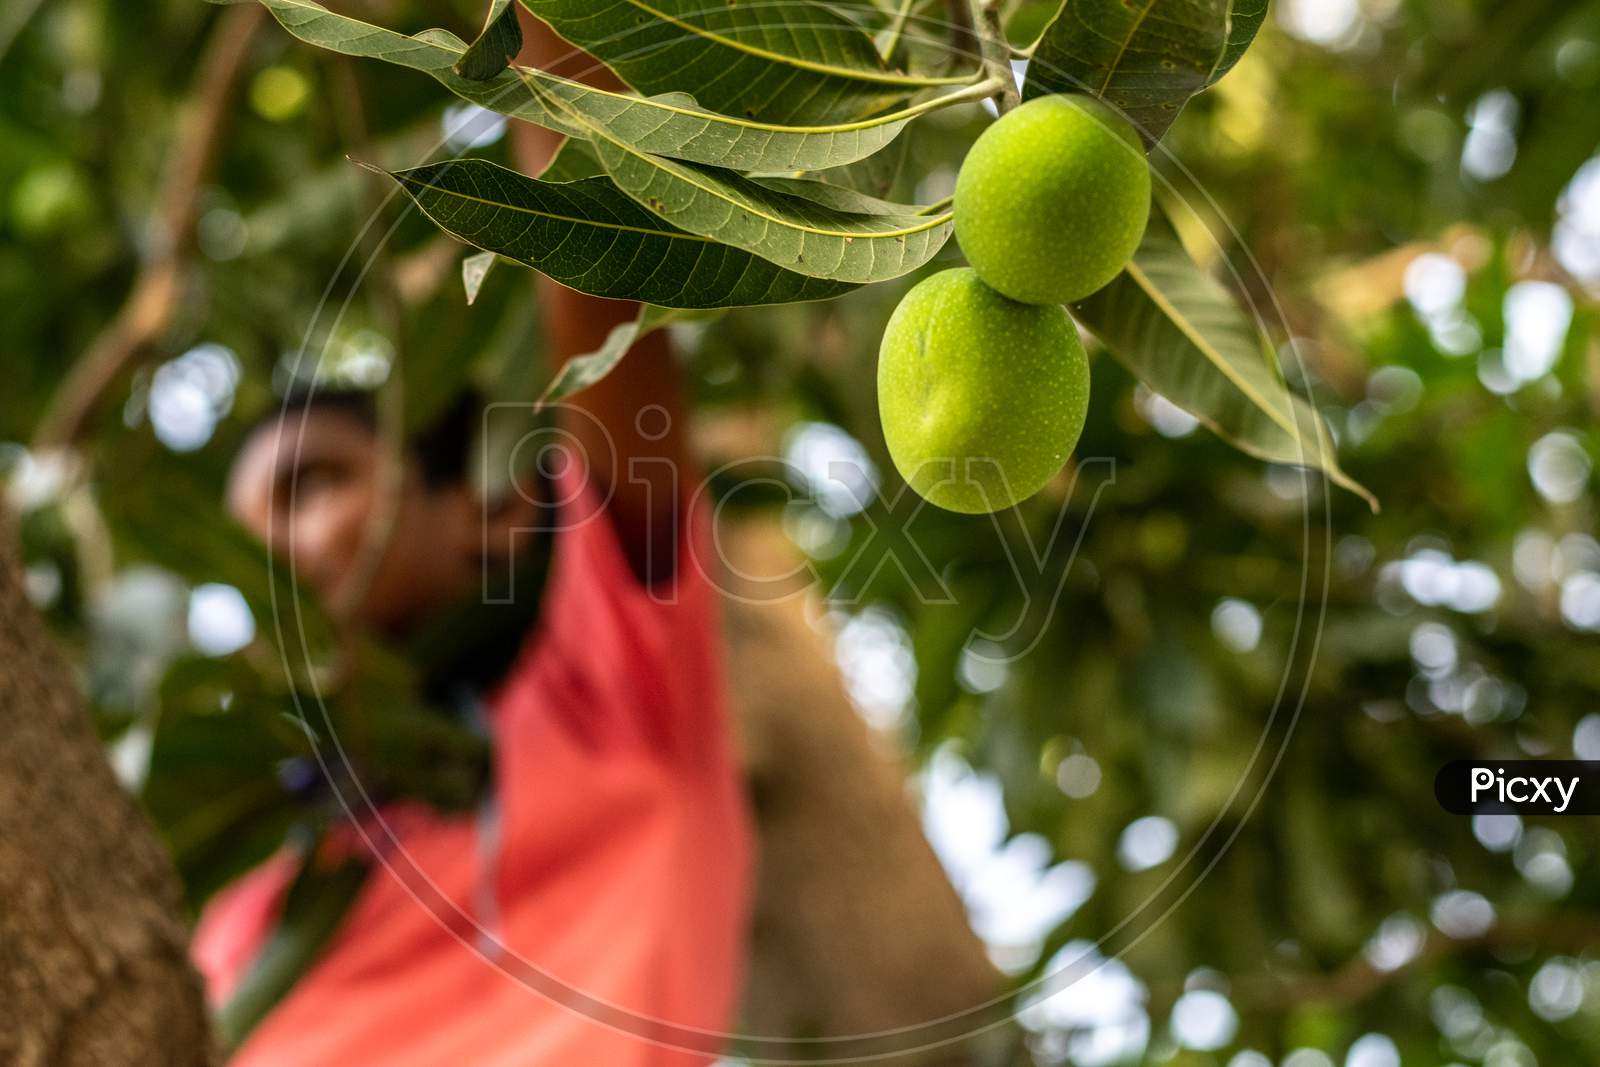 Fresh green raw mangoes hanging on a tree and a boy picking up mangoes in the background